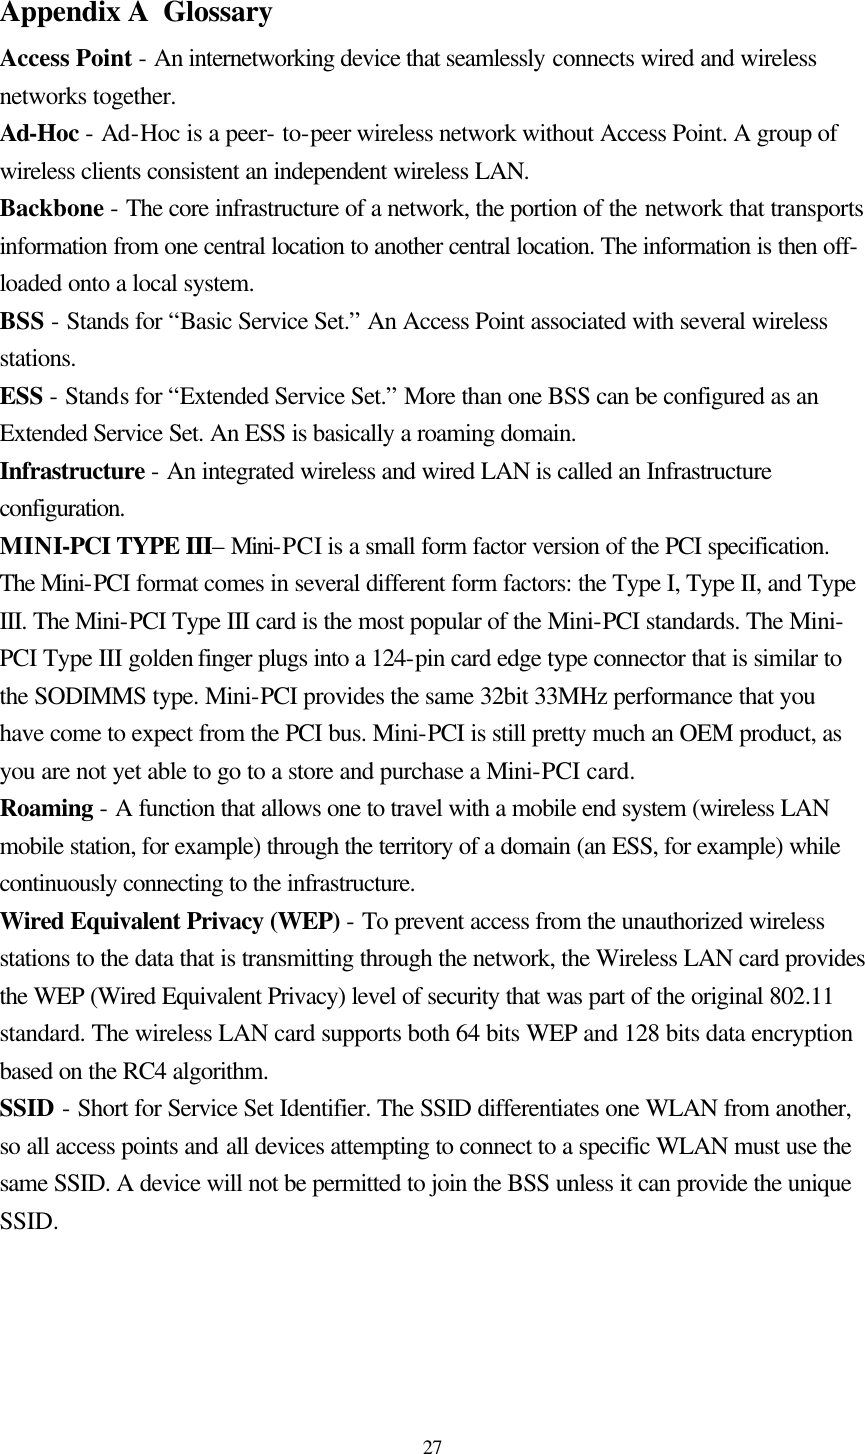  27 Appendix A  Glossary Access Point - An internetworking device that seamlessly connects wired and wireless networks together. Ad-Hoc - Ad-Hoc is a peer- to-peer wireless network without Access Point. A group of wireless clients consistent an independent wireless LAN. Backbone - The core infrastructure of a network, the portion of the network that transports information from one central location to another central location. The information is then off-loaded onto a local system. BSS - Stands for “Basic Service Set.” An Access Point associated with several wireless stations. ESS - Stands for “Extended Service Set.” More than one BSS can be configured as an Extended Service Set. An ESS is basically a roaming domain. Infrastructure - An integrated wireless and wired LAN is called an Infrastructure configuration. MINI-PCI TYPE III– Mini-PCI is a small form factor version of the PCI specification. The Mini-PCI format comes in several different form factors: the Type I, Type II, and Type III. The Mini-PCI Type III card is the most popular of the Mini-PCI standards. The Mini-PCI Type III golden finger plugs into a 124-pin card edge type connector that is similar to the SODIMMS type. Mini-PCI provides the same 32bit 33MHz performance that you have come to expect from the PCI bus. Mini-PCI is still pretty much an OEM product, as you are not yet able to go to a store and purchase a Mini-PCI card.  Roaming - A function that allows one to travel with a mobile end system (wireless LAN mobile station, for example) through the territory of a domain (an ESS, for example) while continuously connecting to the infrastructure. Wired Equivalent Privacy (WEP) - To prevent access from the unauthorized wireless stations to the data that is transmitting through the network, the Wireless LAN card provides the WEP (Wired Equivalent Privacy) level of security that was part of the original 802.11 standard. The wireless LAN card supports both 64 bits WEP and 128 bits data encryption based on the RC4 algorithm. SSID - Short for Service Set Identifier. The SSID differentiates one WLAN from another, so all access points and all devices attempting to connect to a specific WLAN must use the same SSID. A device will not be permitted to join the BSS unless it can provide the unique SSID.    